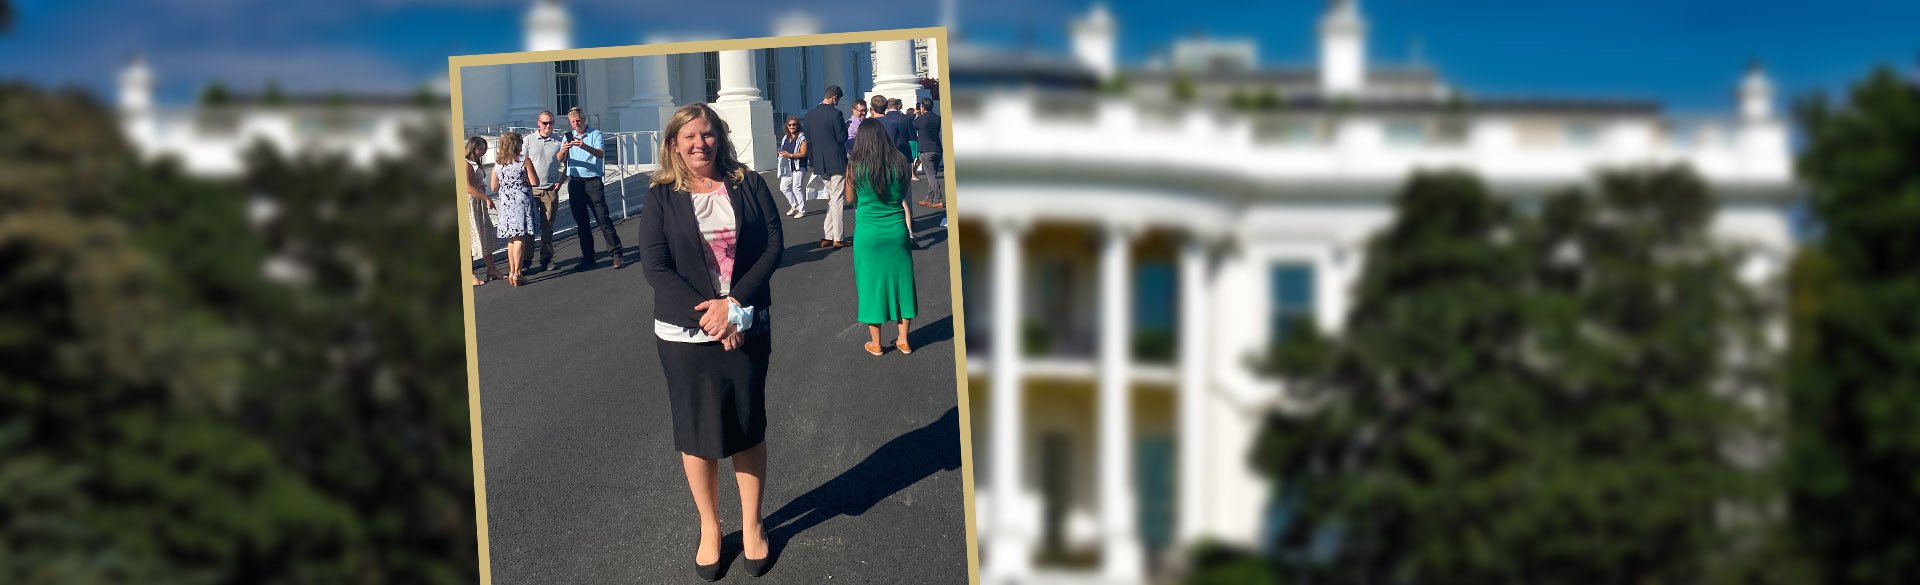 CU College of Nursing’s Laura Rosenthal Visits The White House